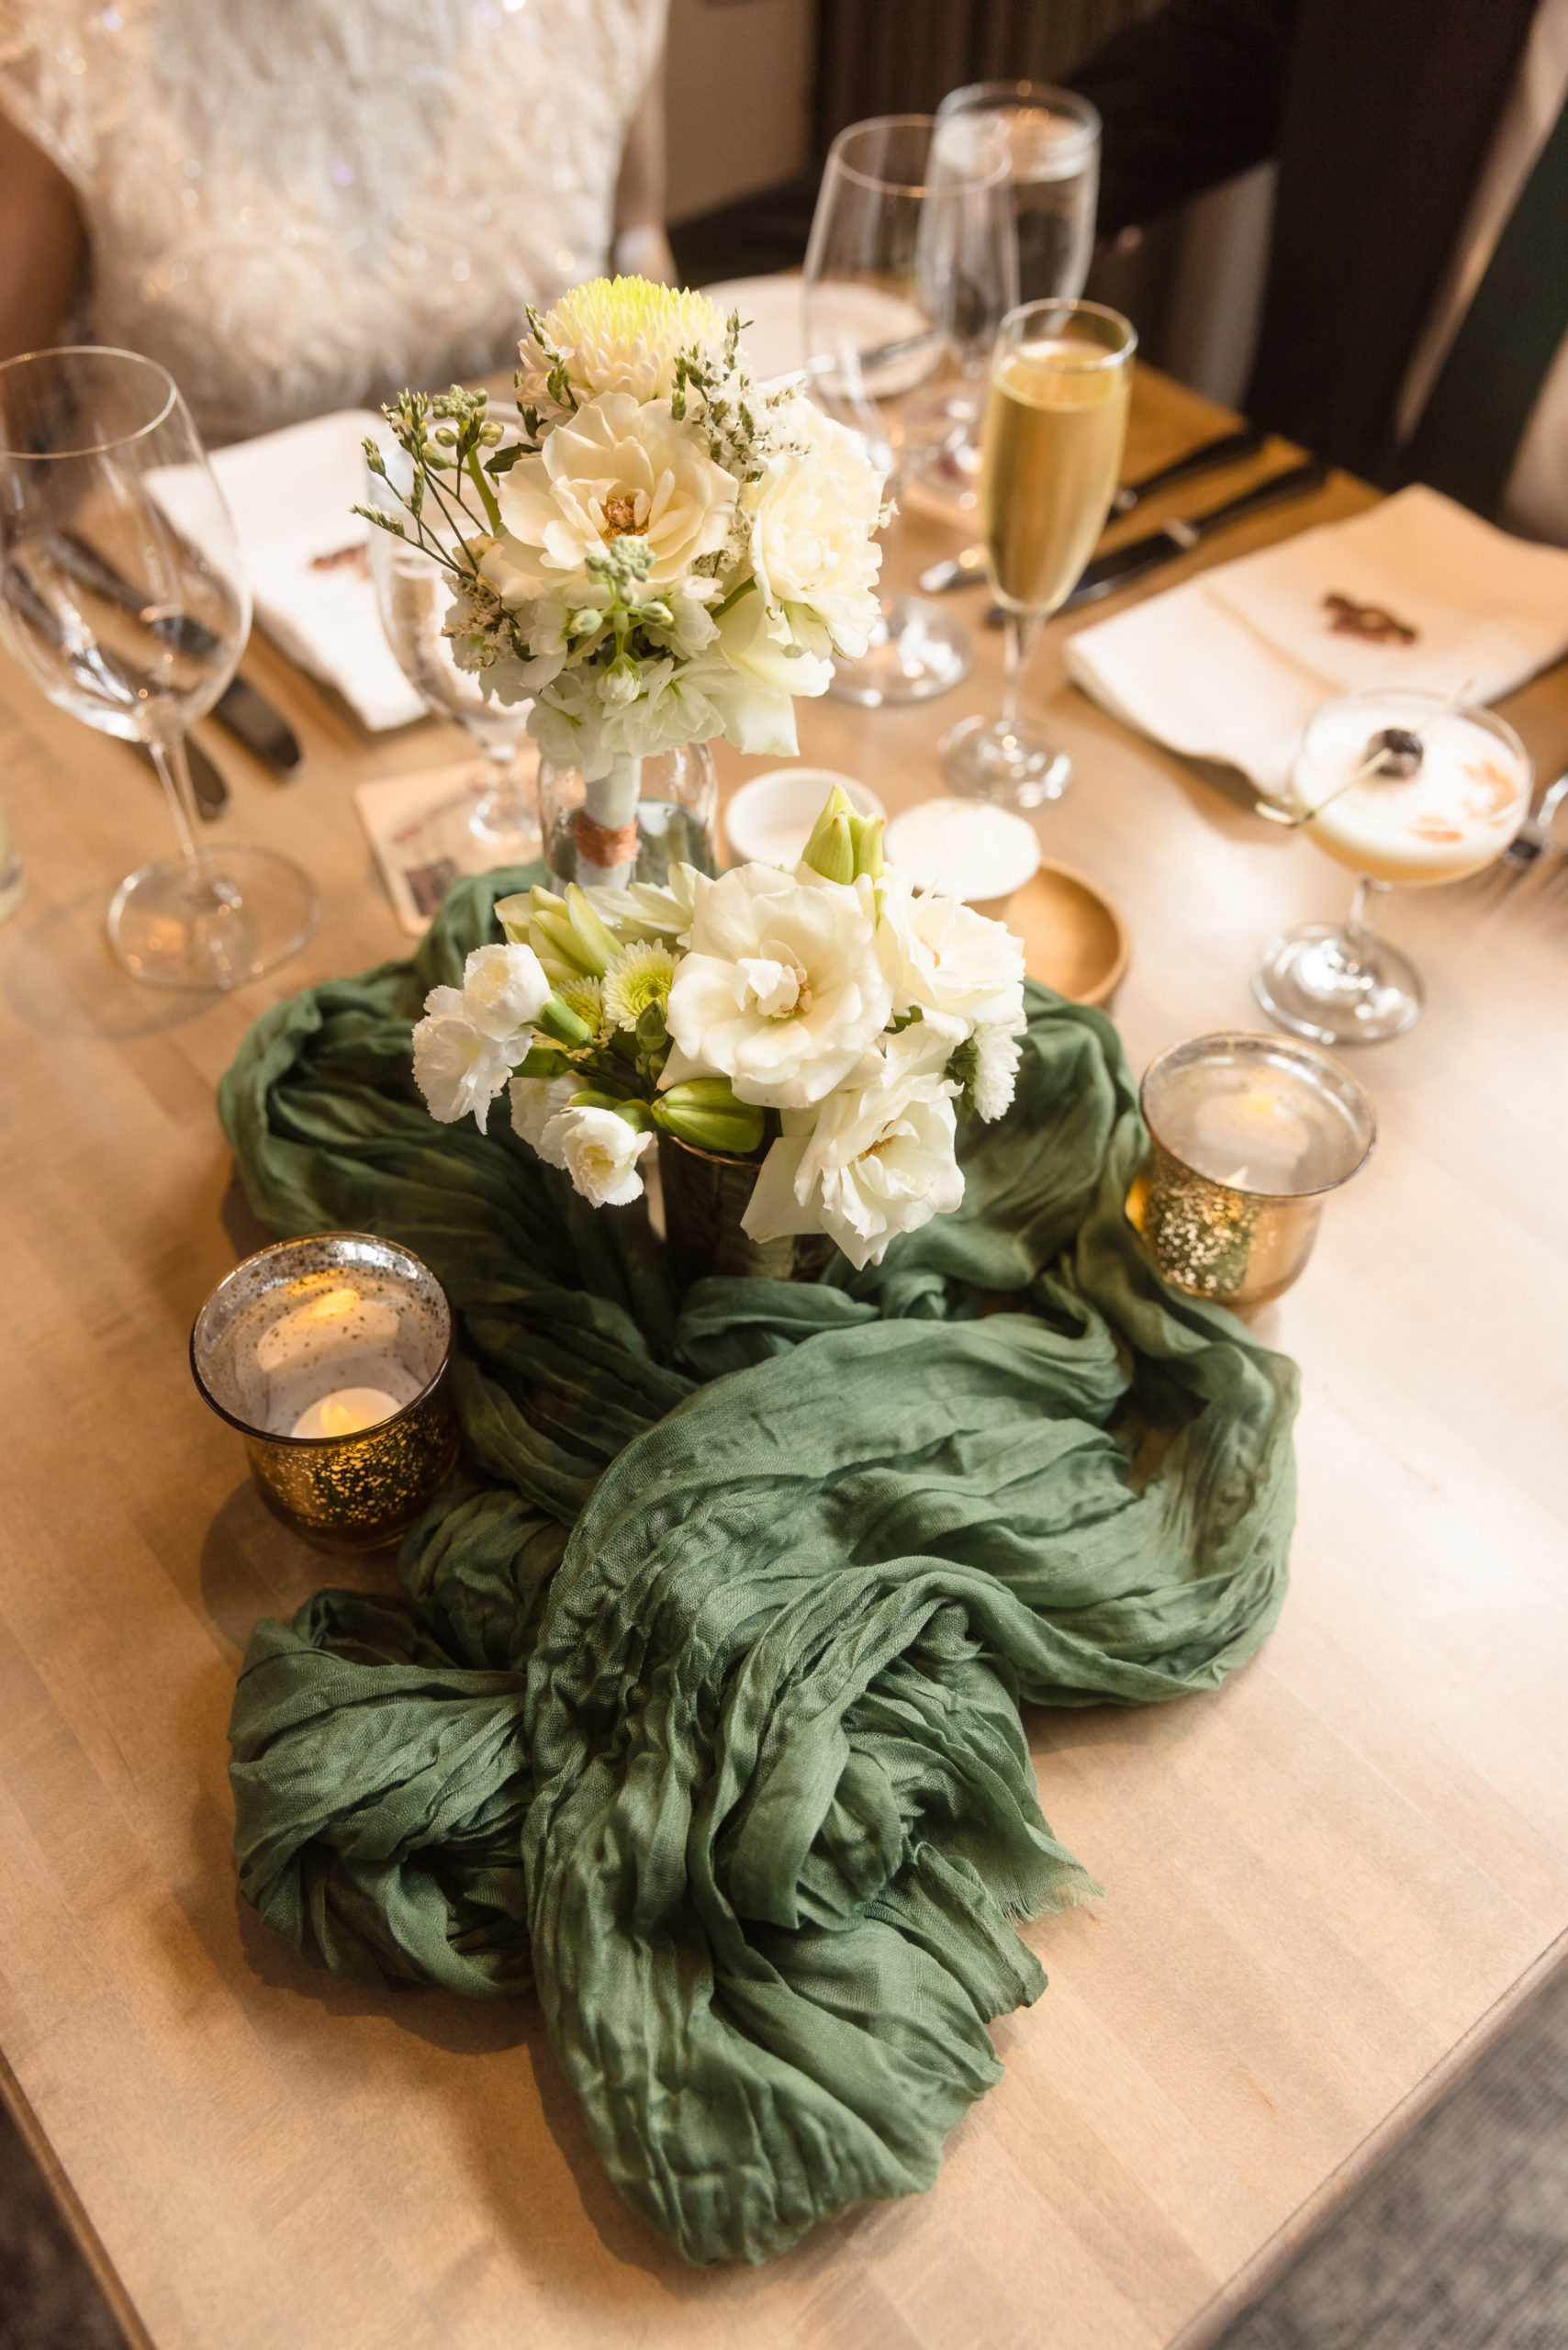 The Ultimate Wedding Guide For Five Crowns In Corona Del Mar. Close-up shot of wedding reception table with floral centerpiece.